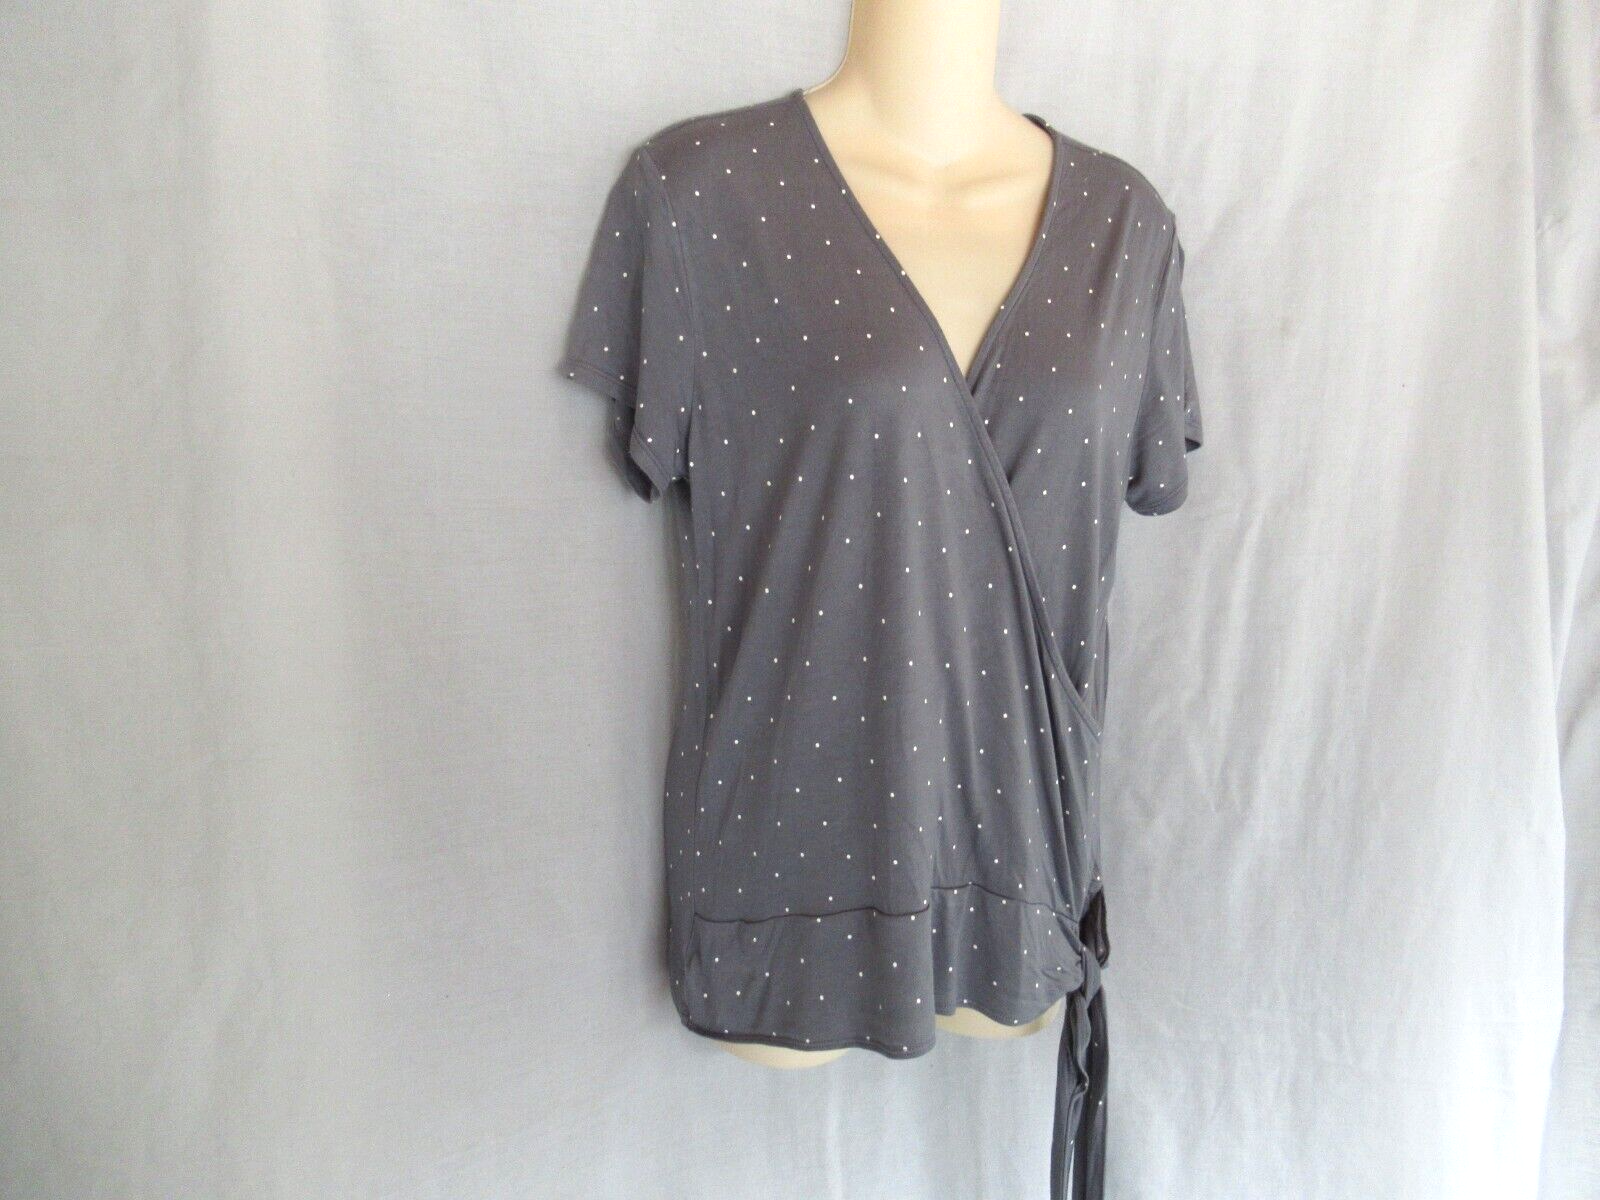 Primary image for LOFT Outlet top  tie cross-over surplice  Large gray white dots cap sleeves